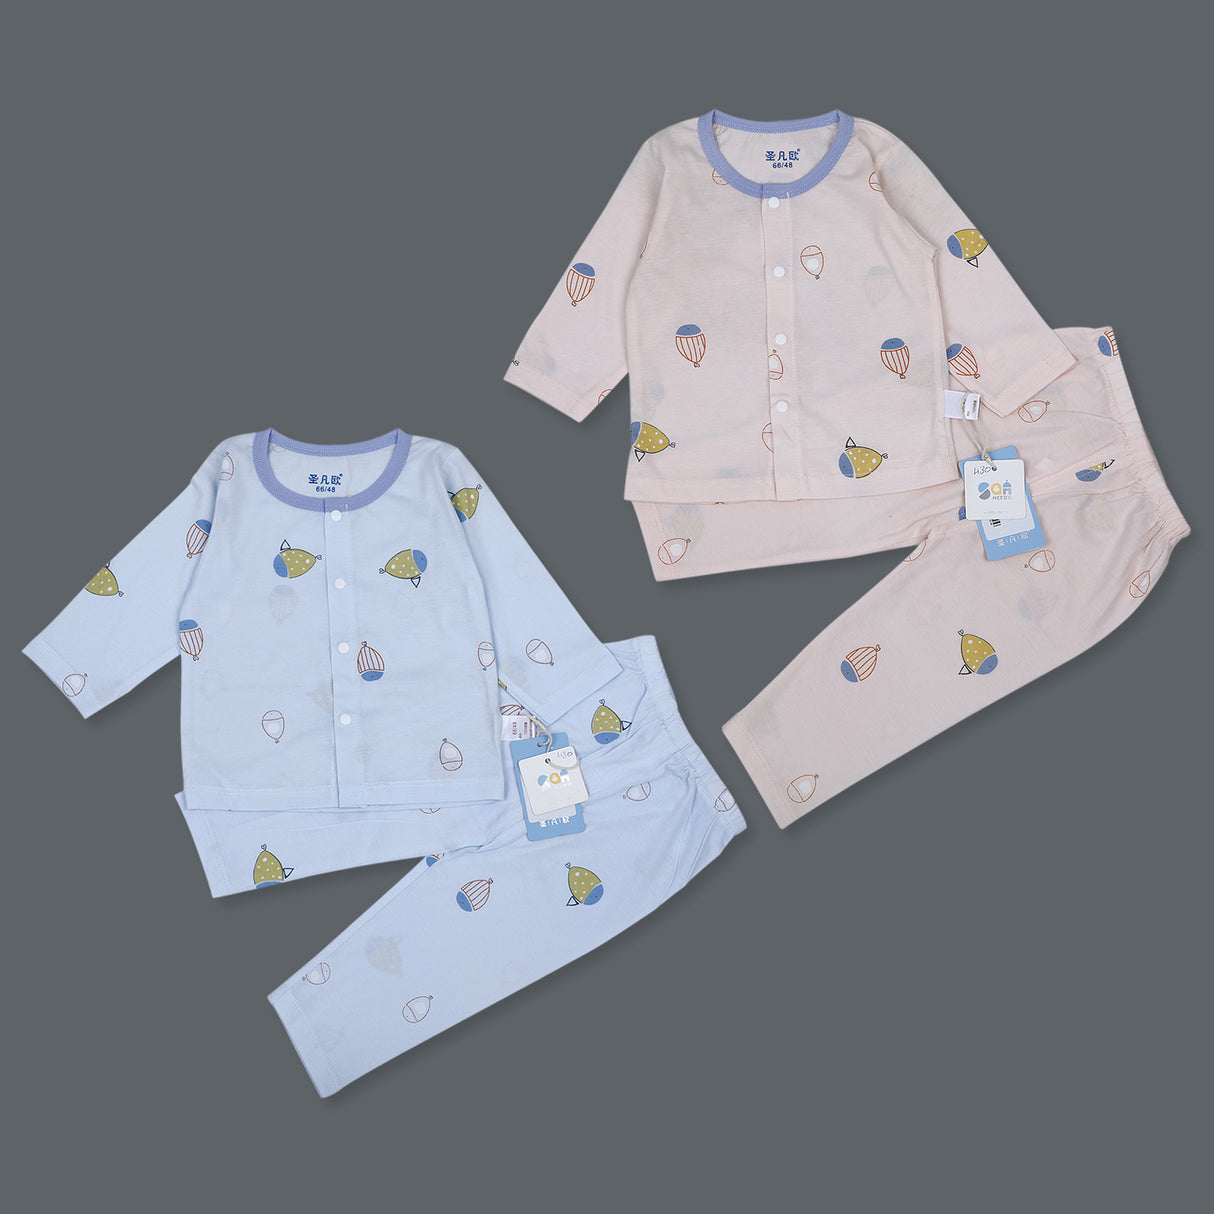 Fish Full Sleeves Top And Pyjama Buttoned Night Suit